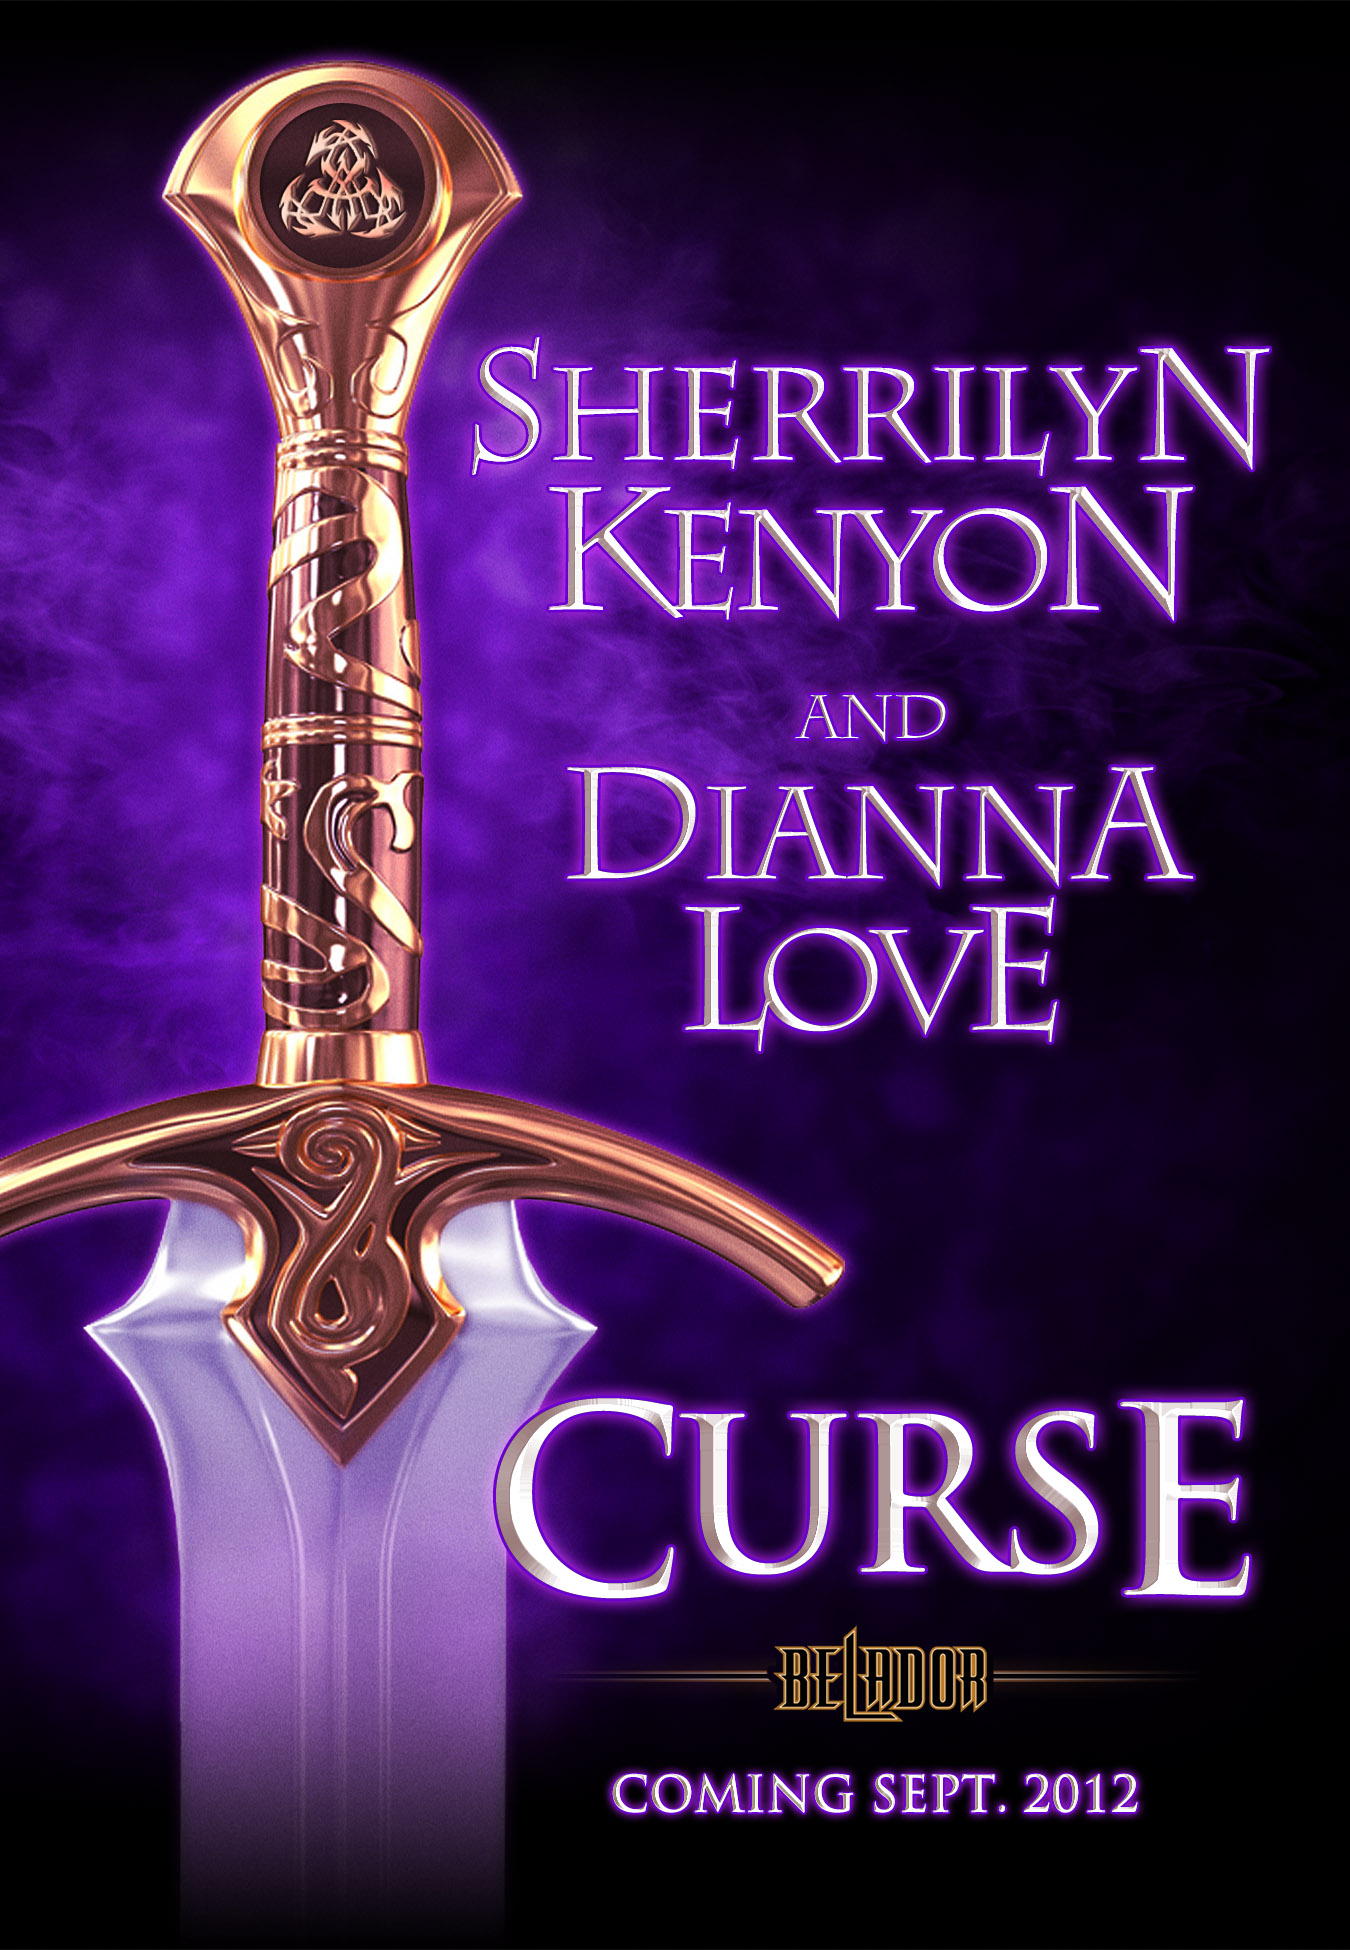 Sherrilyn Kenyon and Dianna Love Curse Book Cover Concept